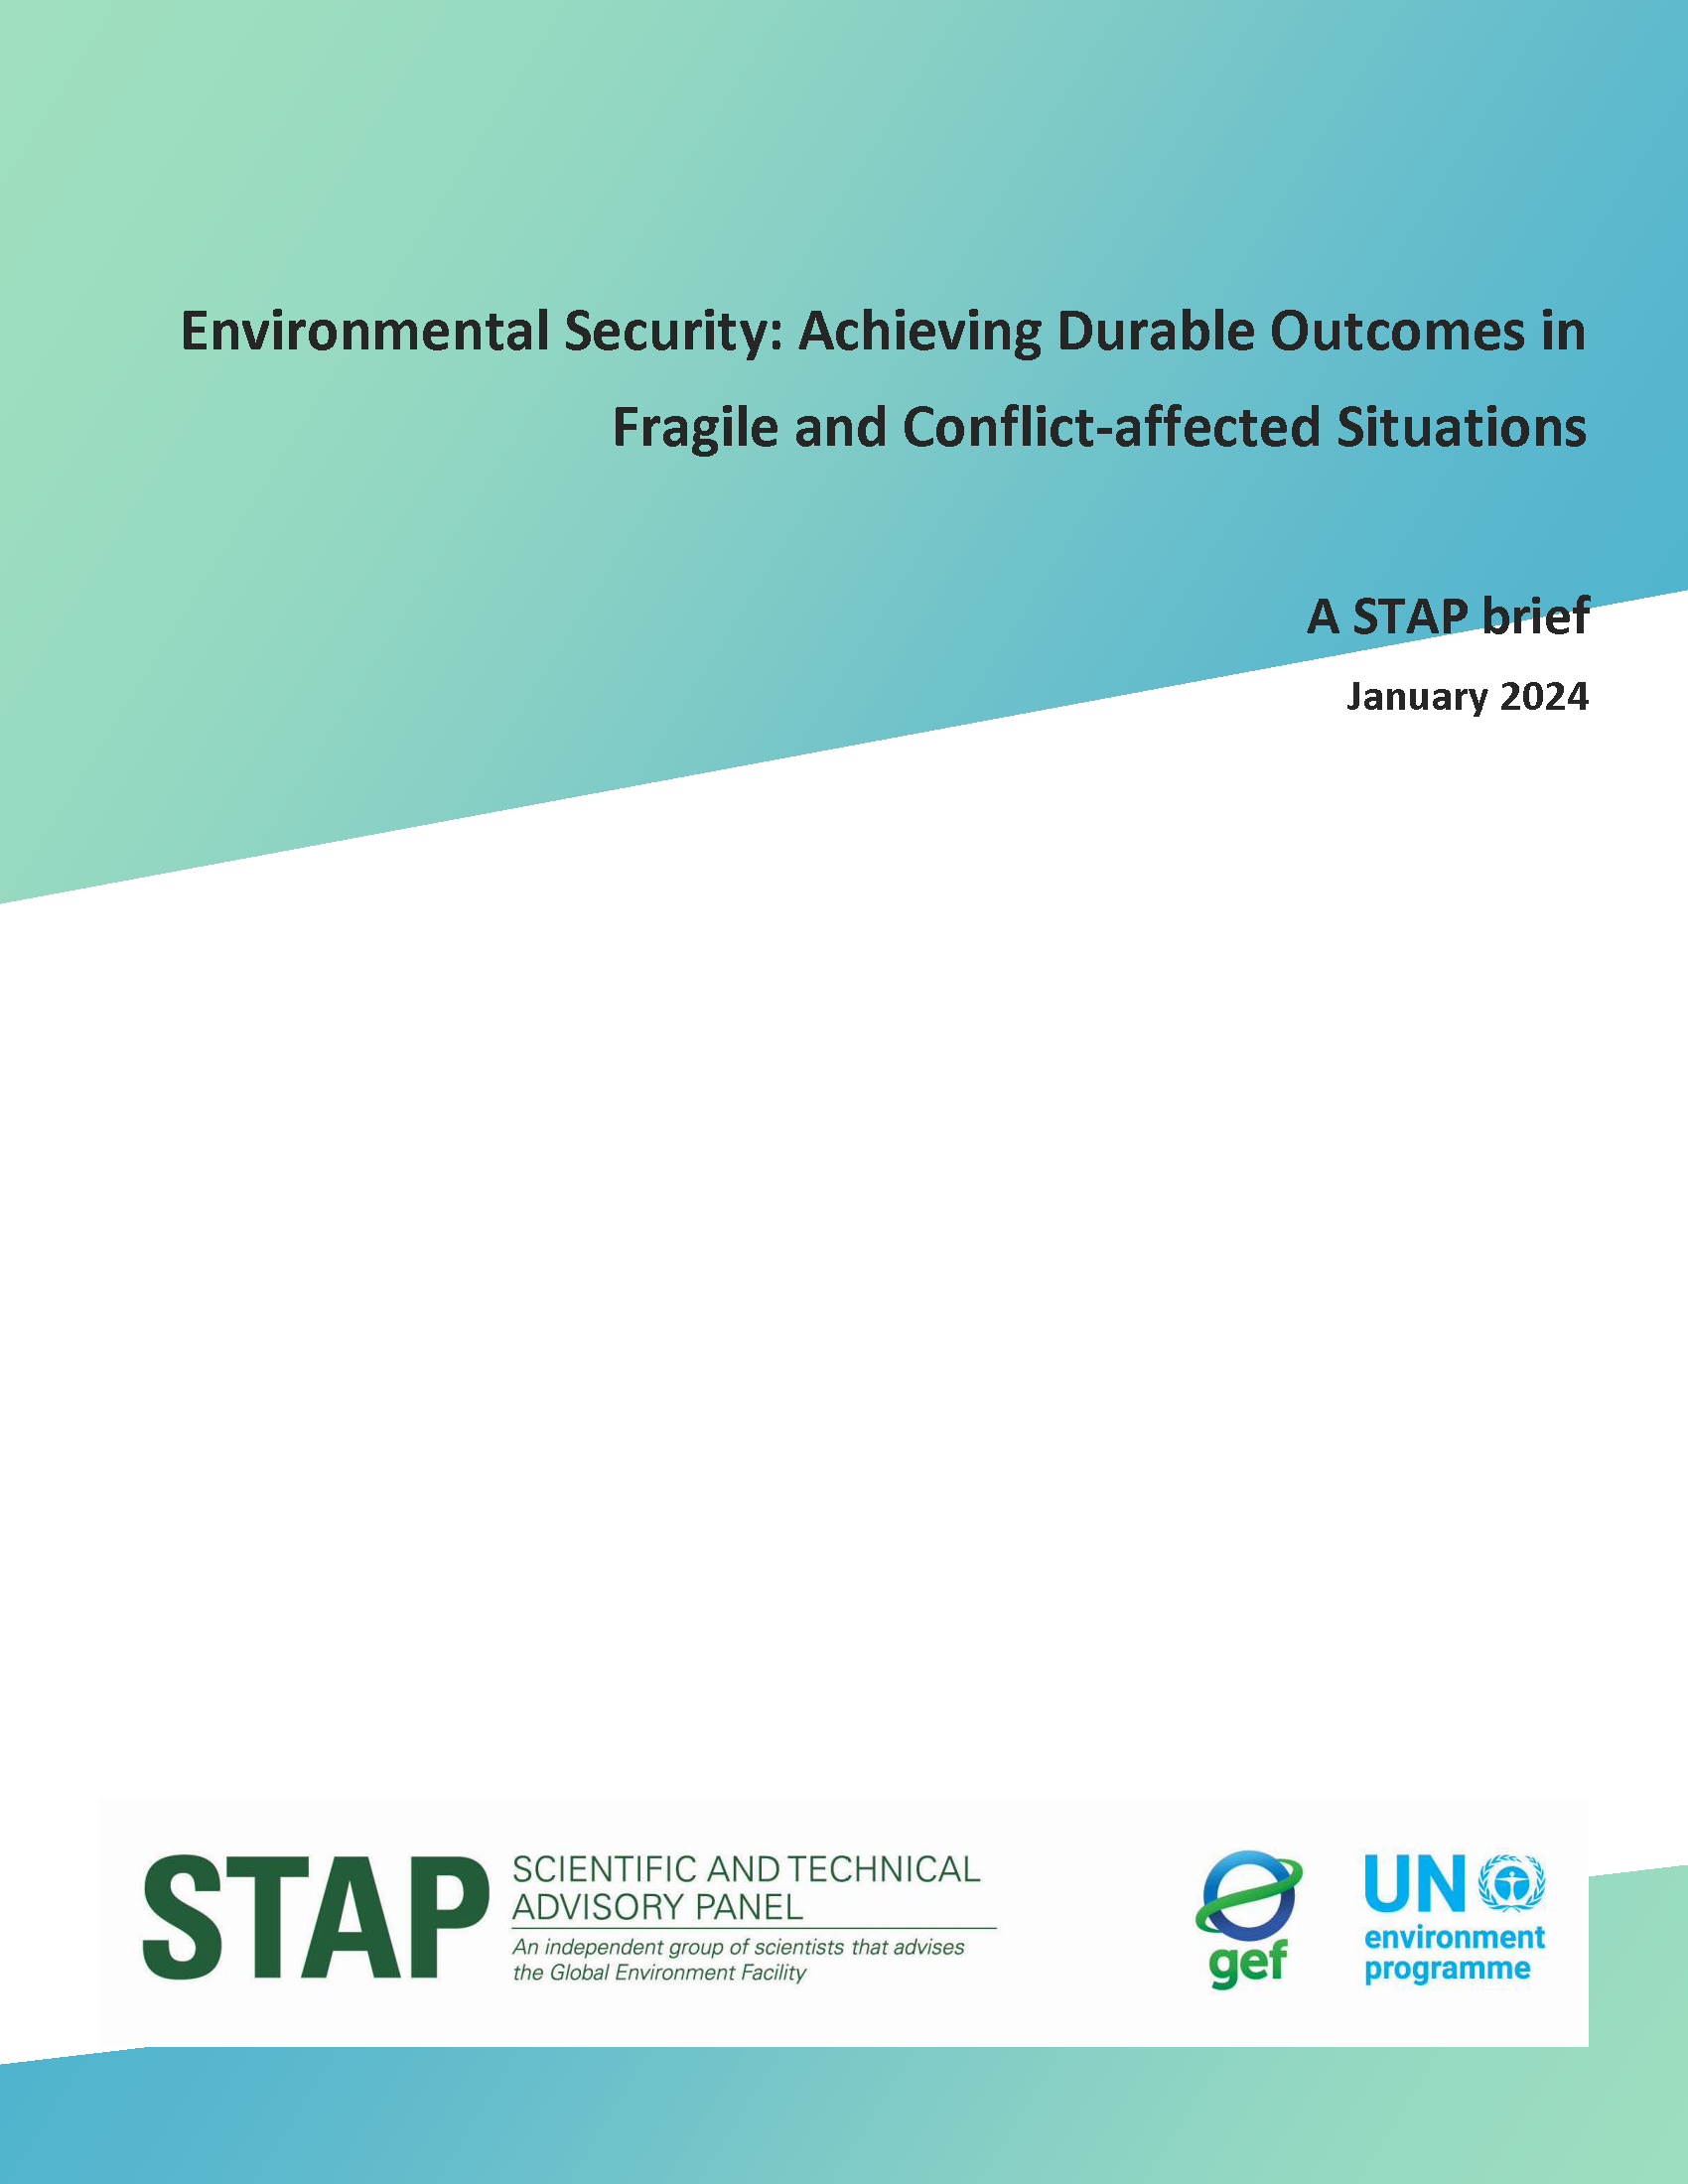 Environmental Security: Achieving Durable Outcomes in Fragile and Conflict-affected Situations